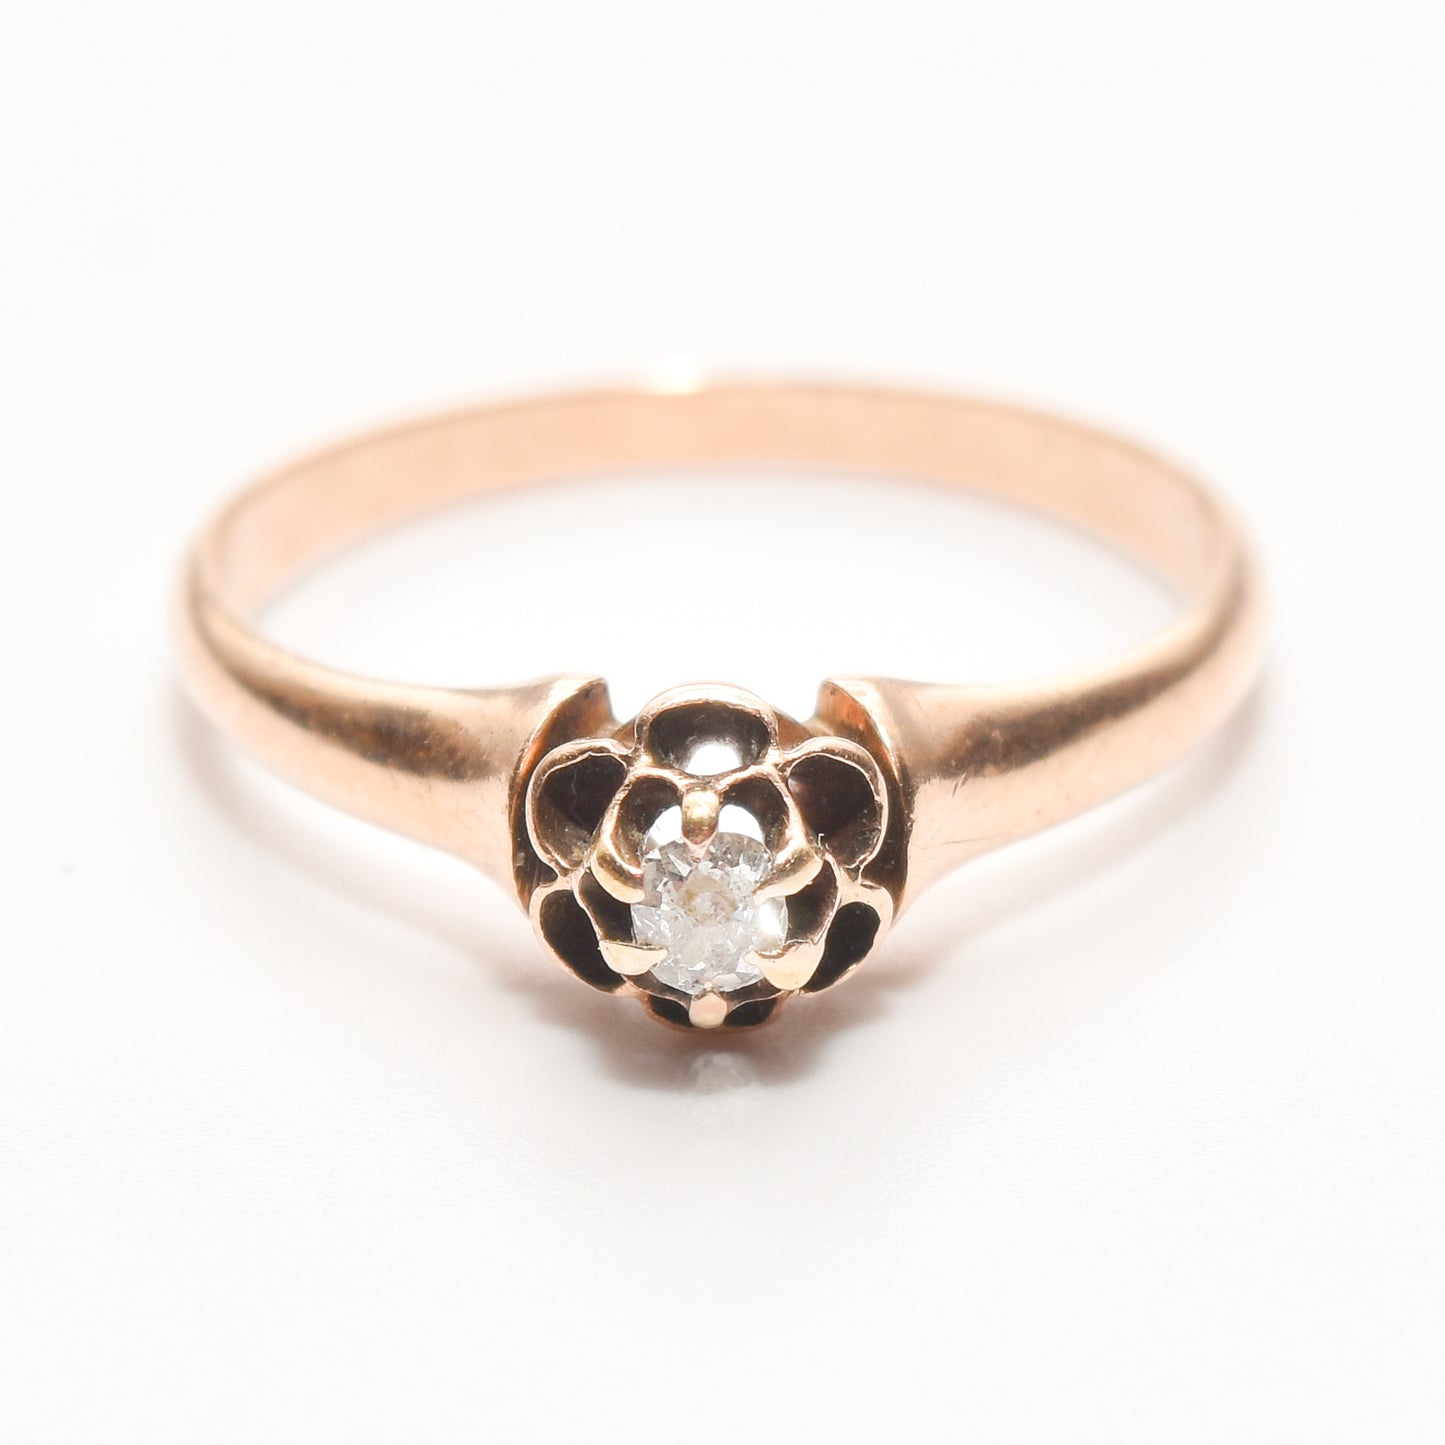 Antique 10K rose gold diamond engagement ring featuring a .12 carat old mine cut diamond, estate jewelry, size 7.75 US, on a white background.